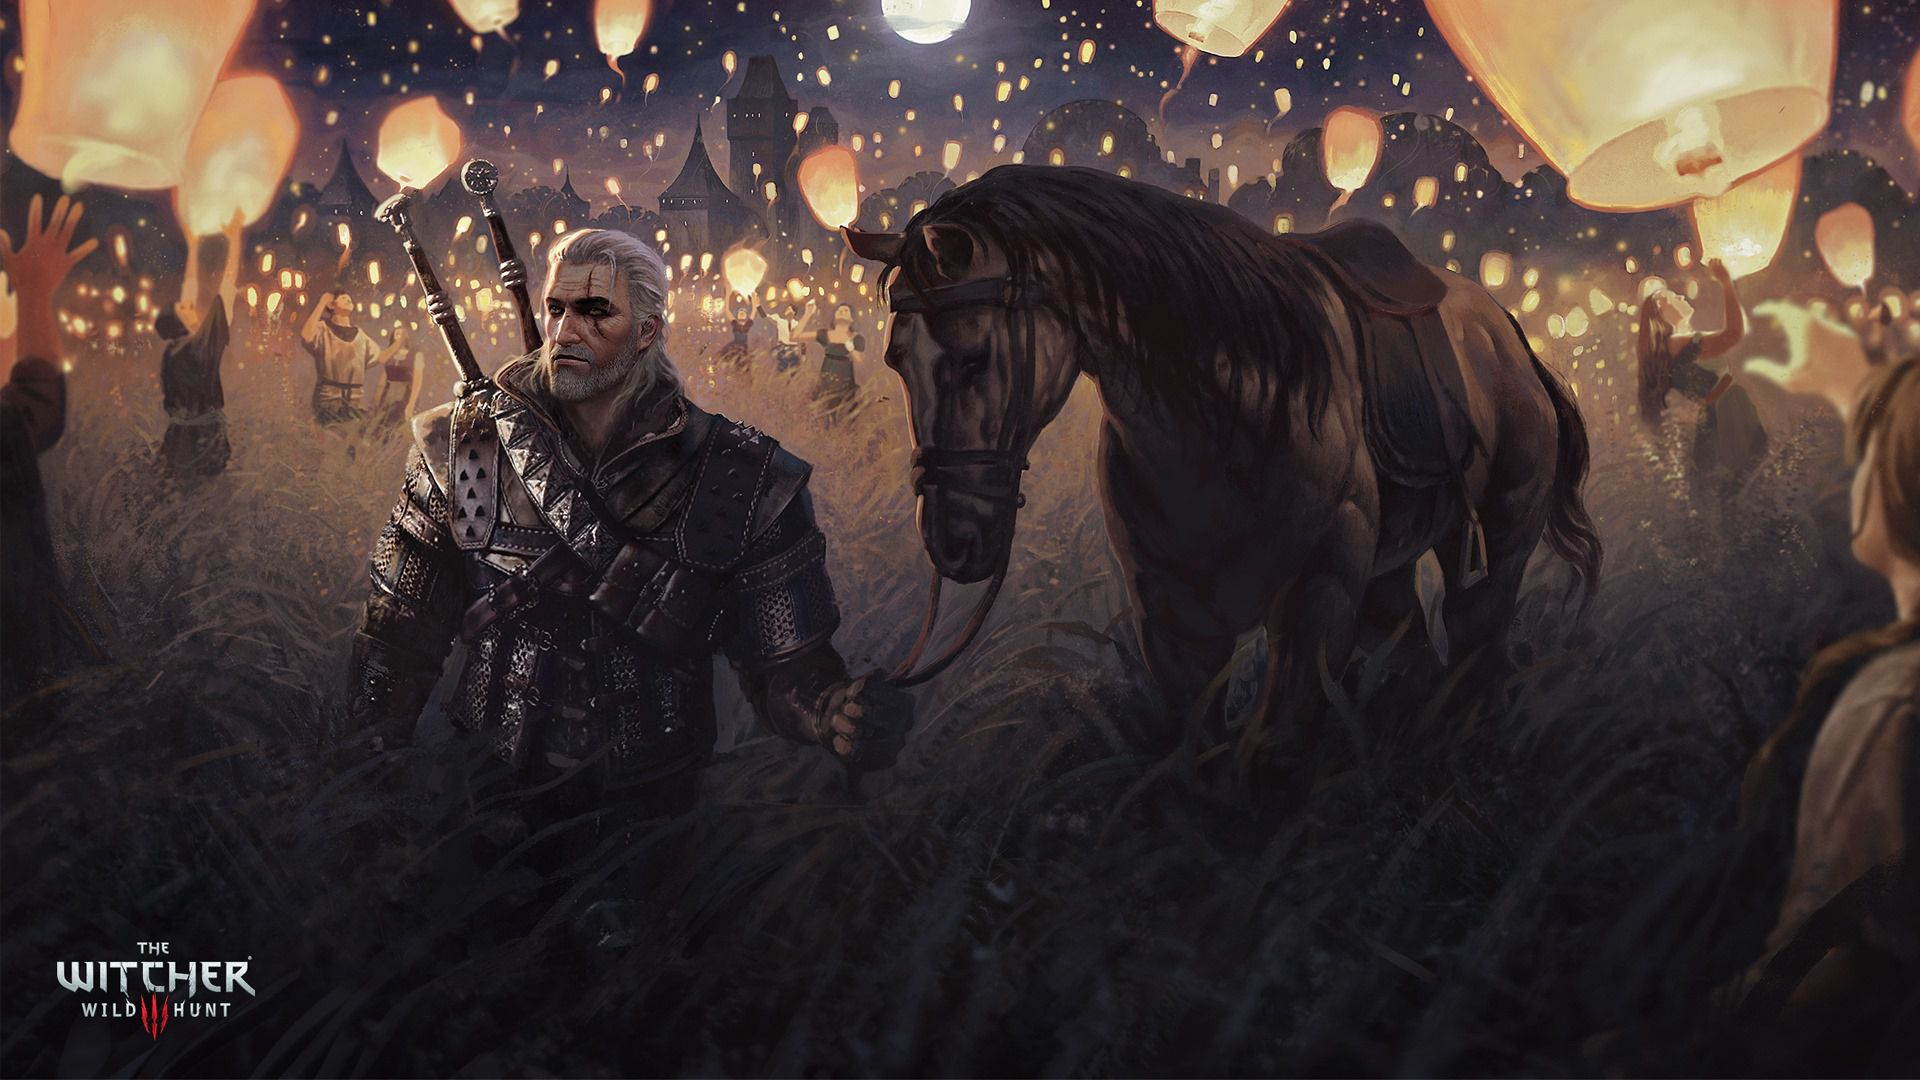 1920x1080 Artwork Video Games The Witcher The Witcher 3 Wild Hunt Wallpaper Resolution: ID:1242360